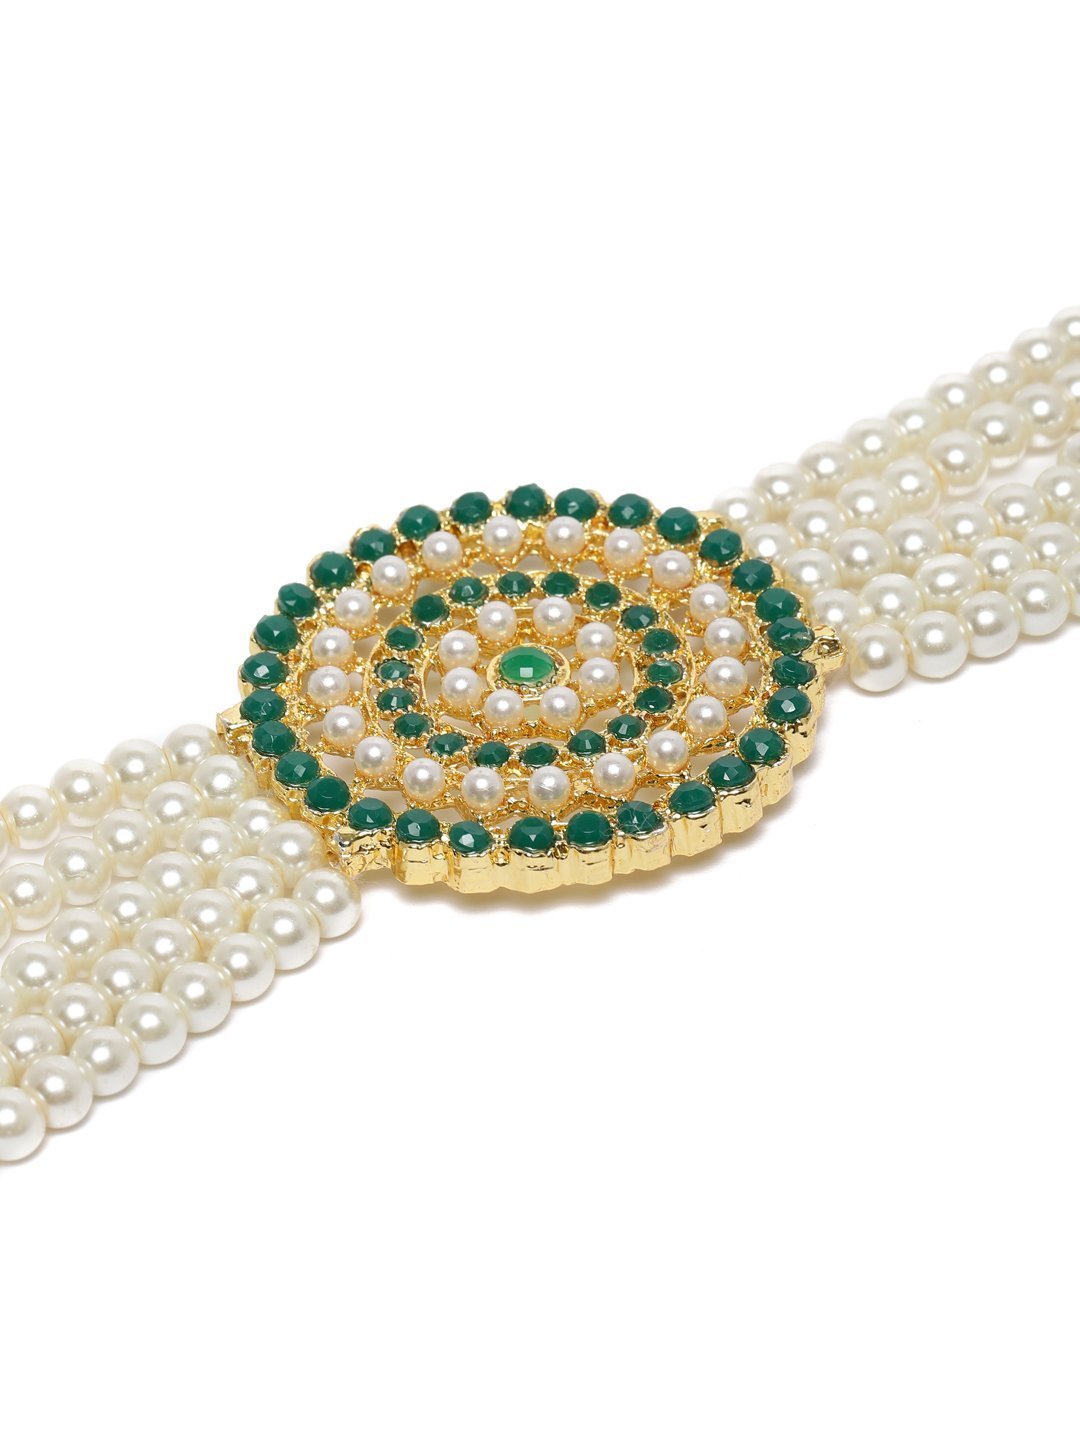 Women's Gold Plated Green Light Weight Pearl Beaded Choker Necklace Set - i jewels